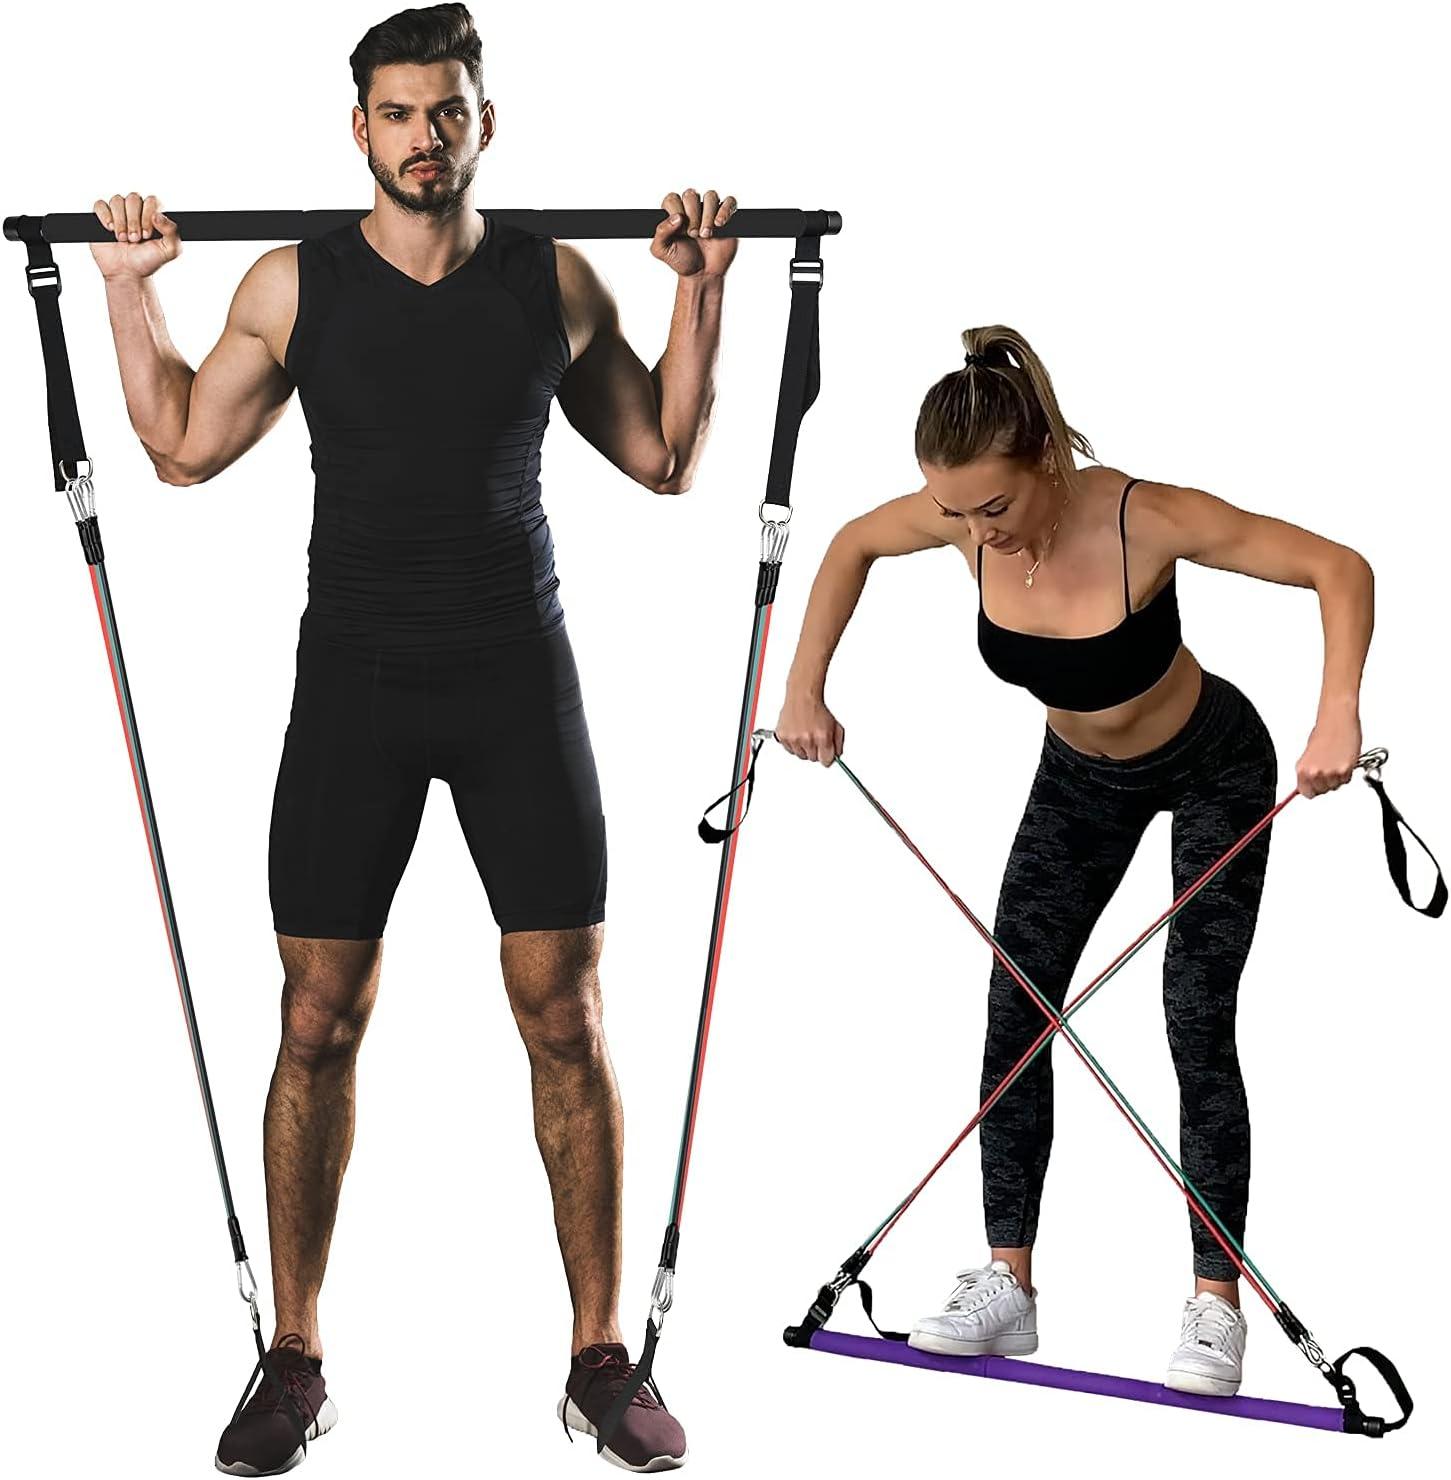 Goocrun Portable Pilates Bar Kit with Resistance Bands for Men and Women -  3 Set Exercise Bands (15, 20, 30 LB) - Home Gym， Workout Kit for Body  Toning – with Fitness